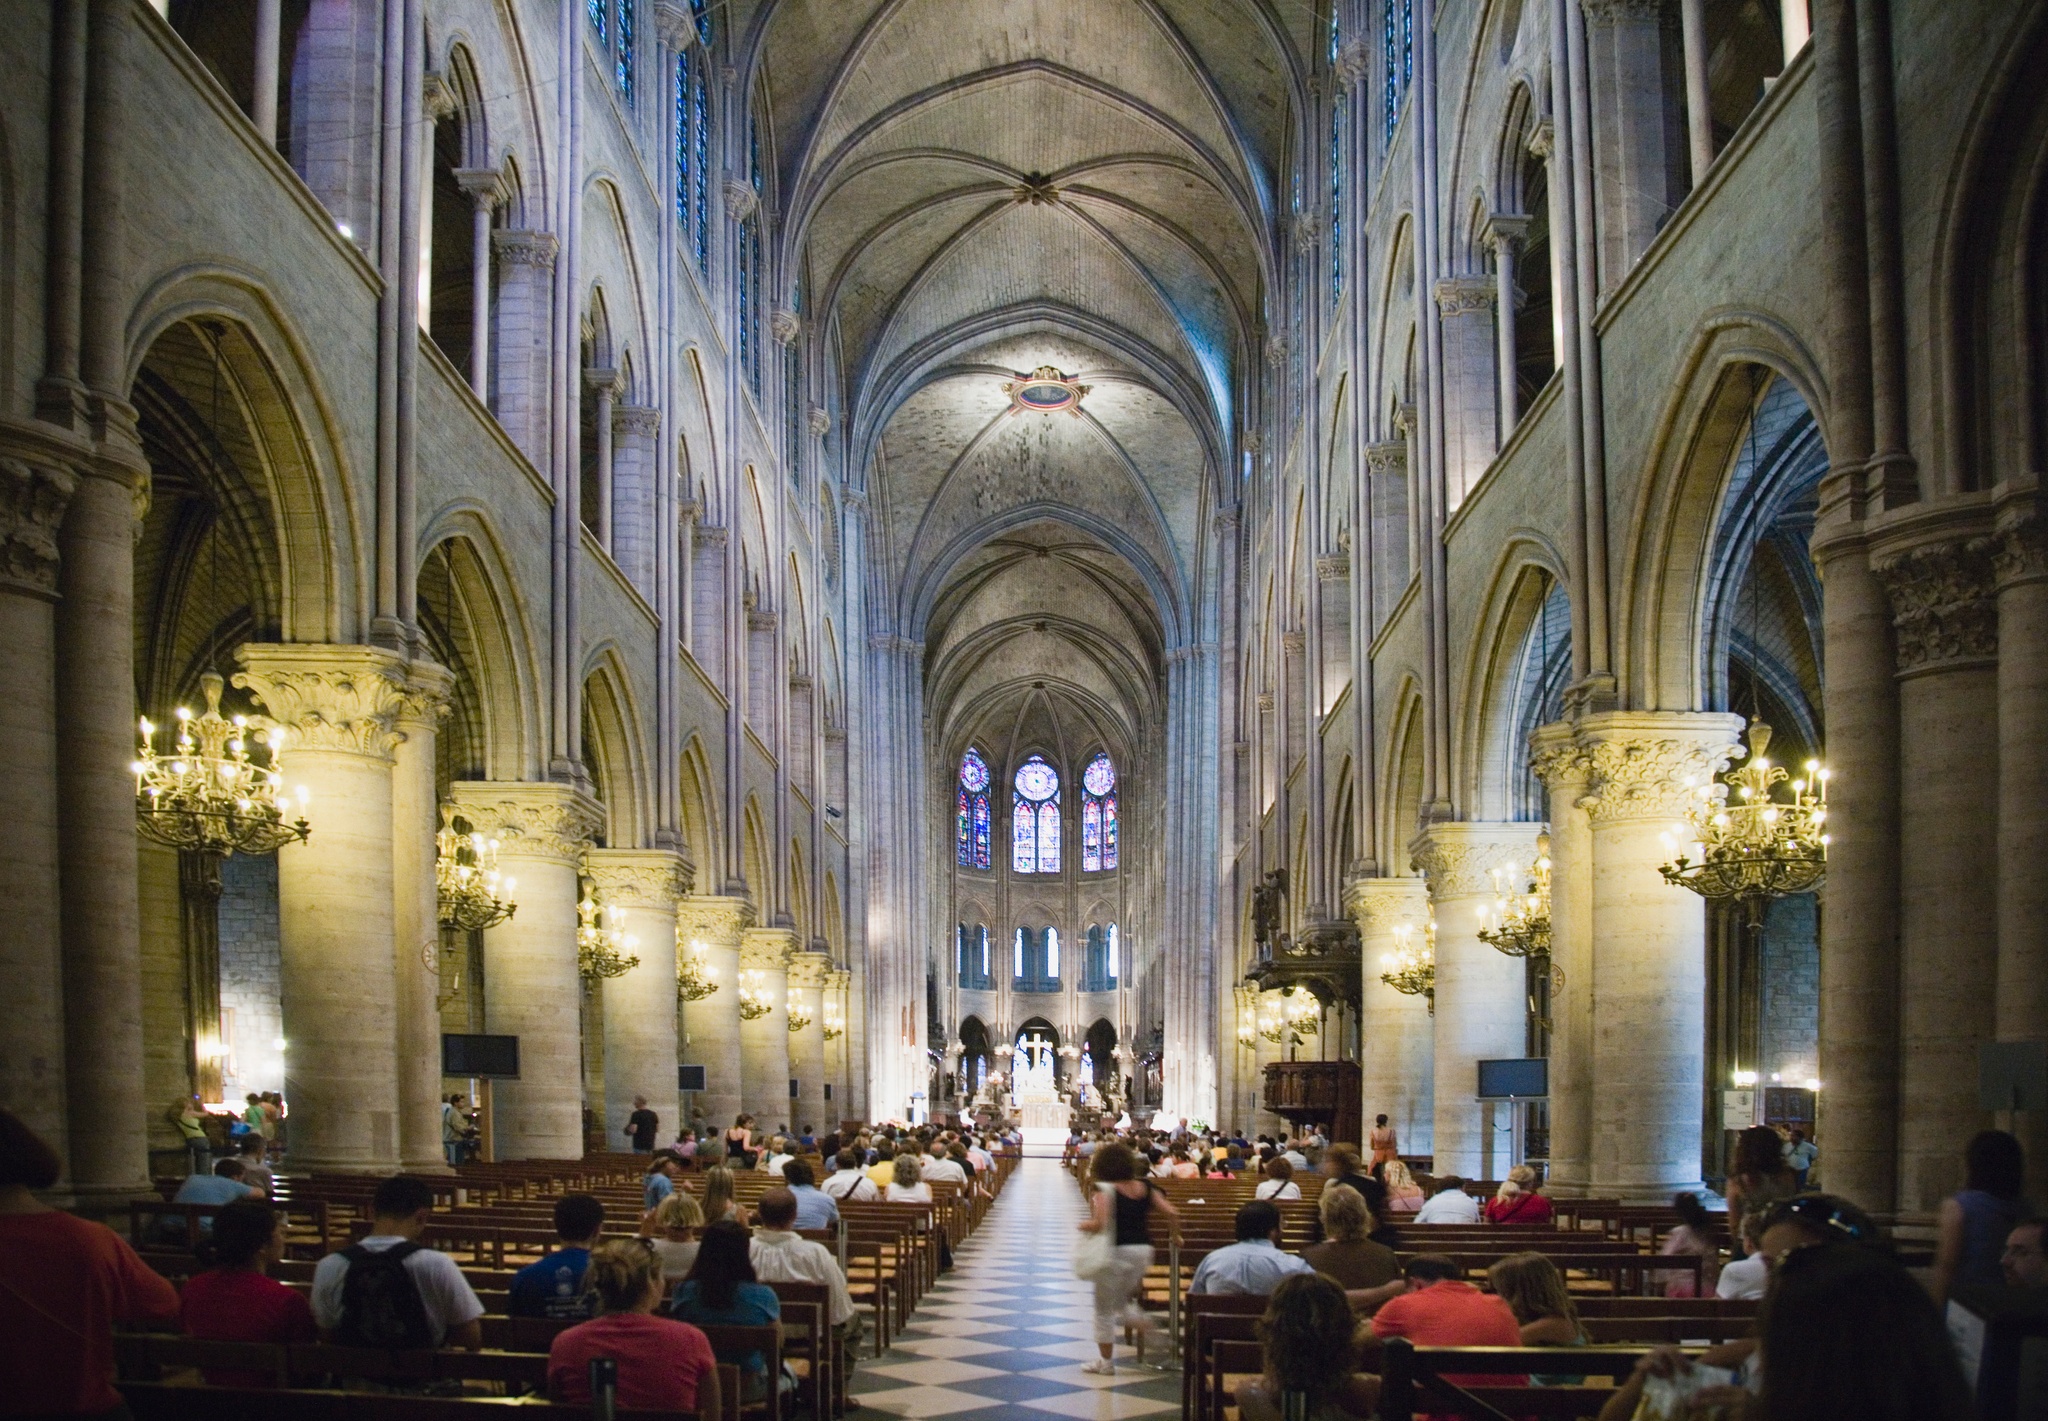 A view down the aisle of a cathedral nave with people seated in chairs on either side 